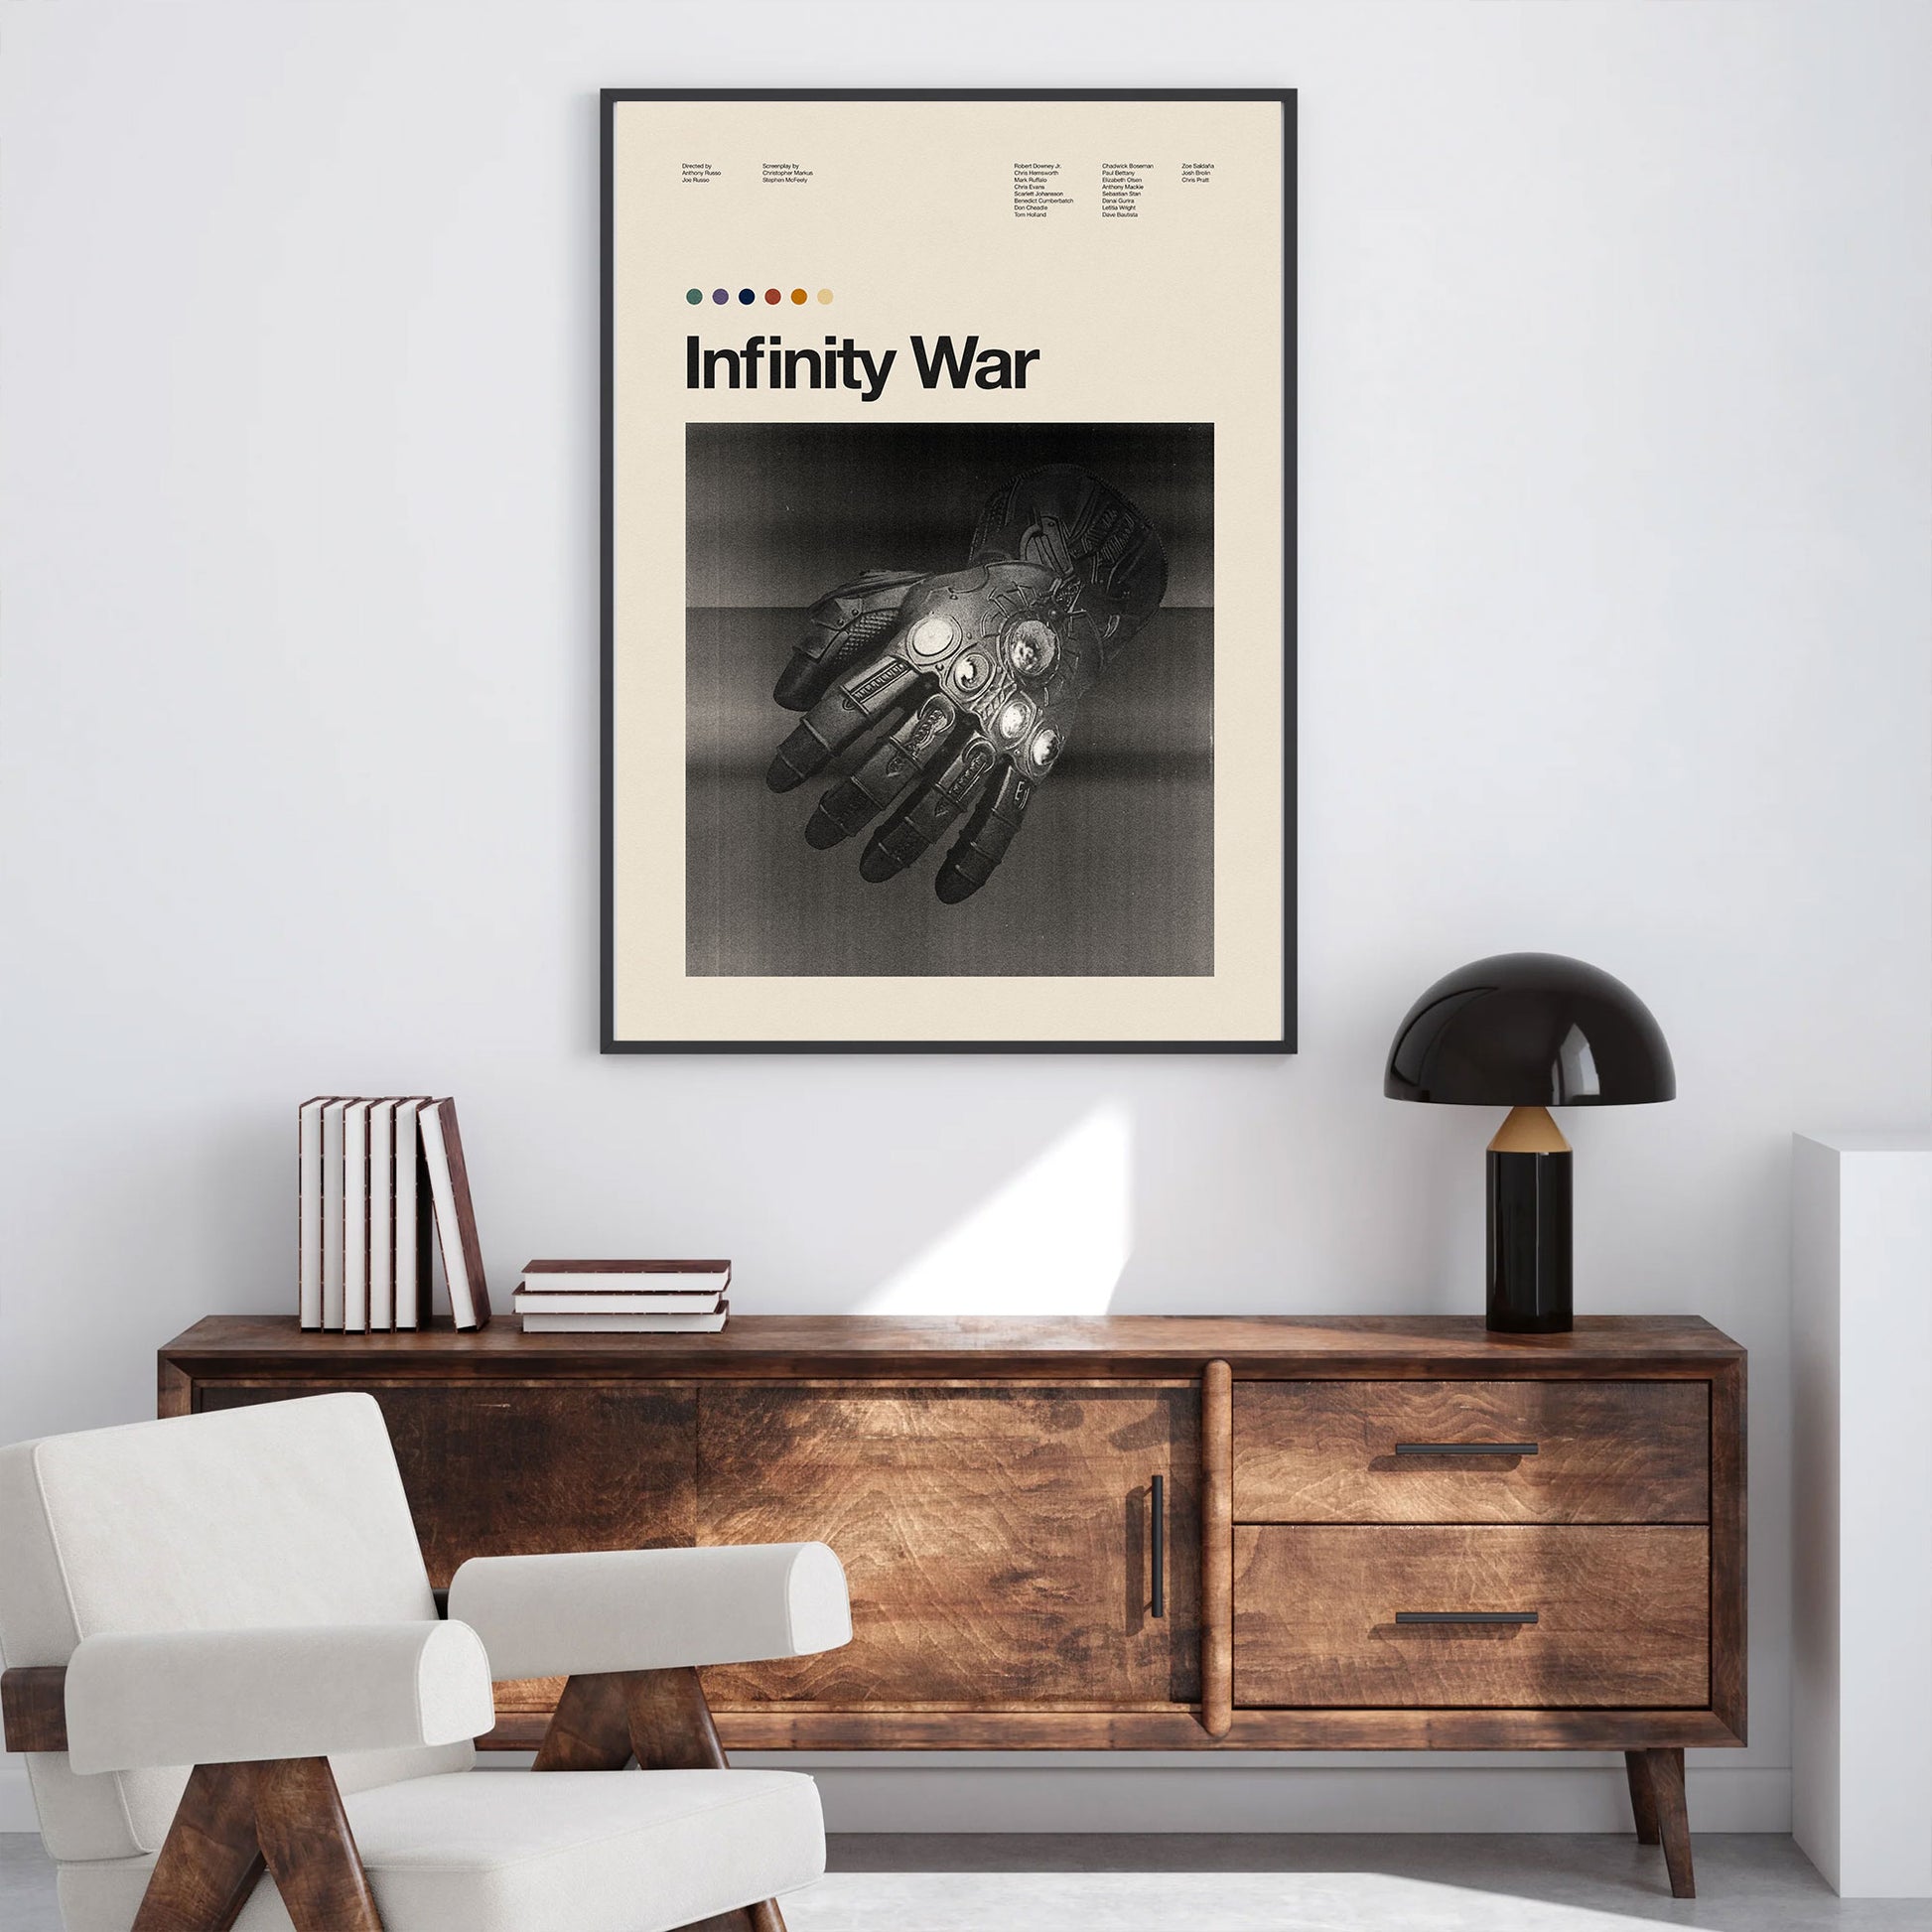 A movie-inspired framed print art featuring infinity gauntlet from the avengers movie